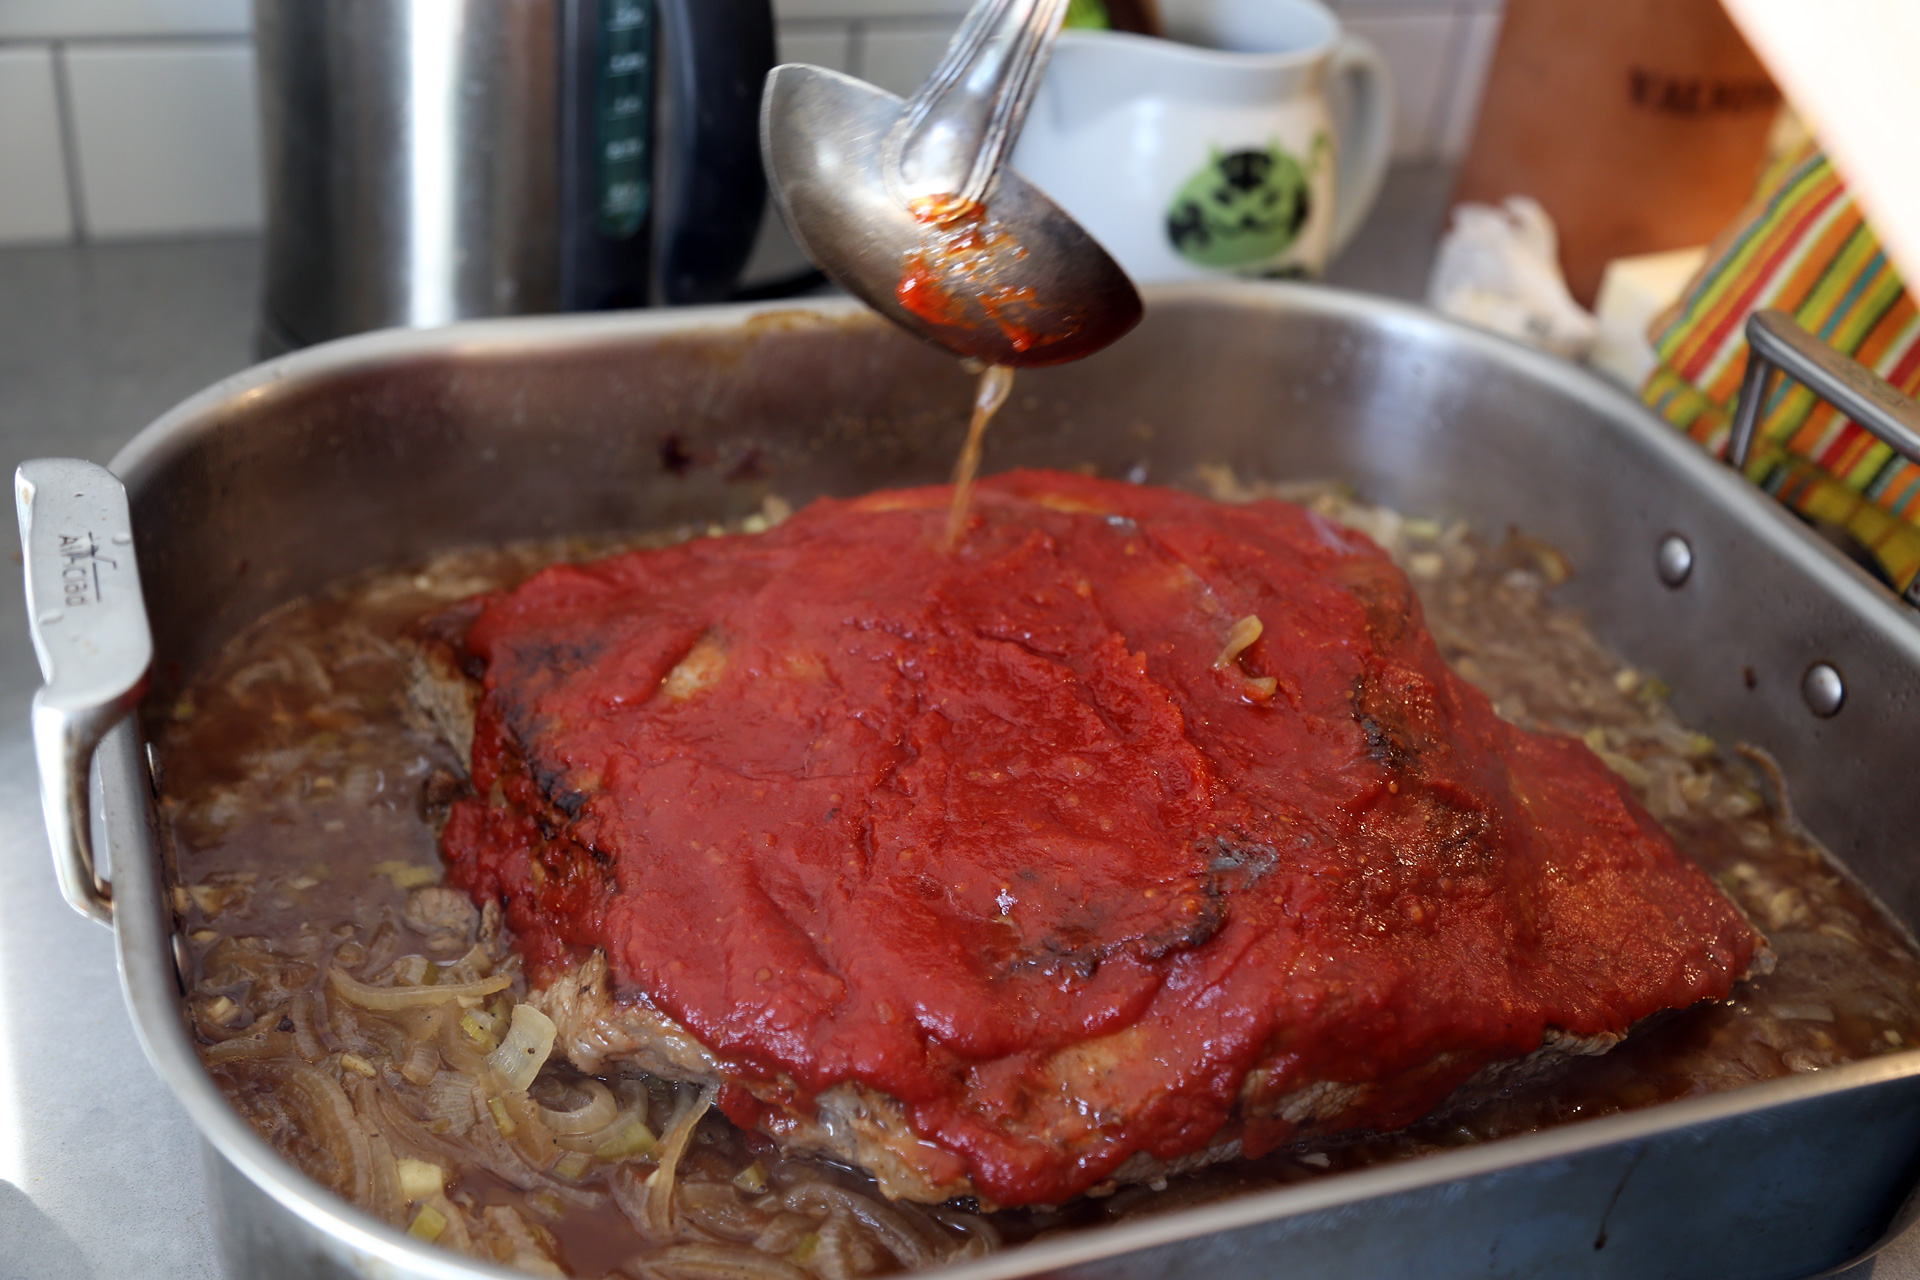 Transfer to the middle rack of the oven and braise, basting about once an hour.